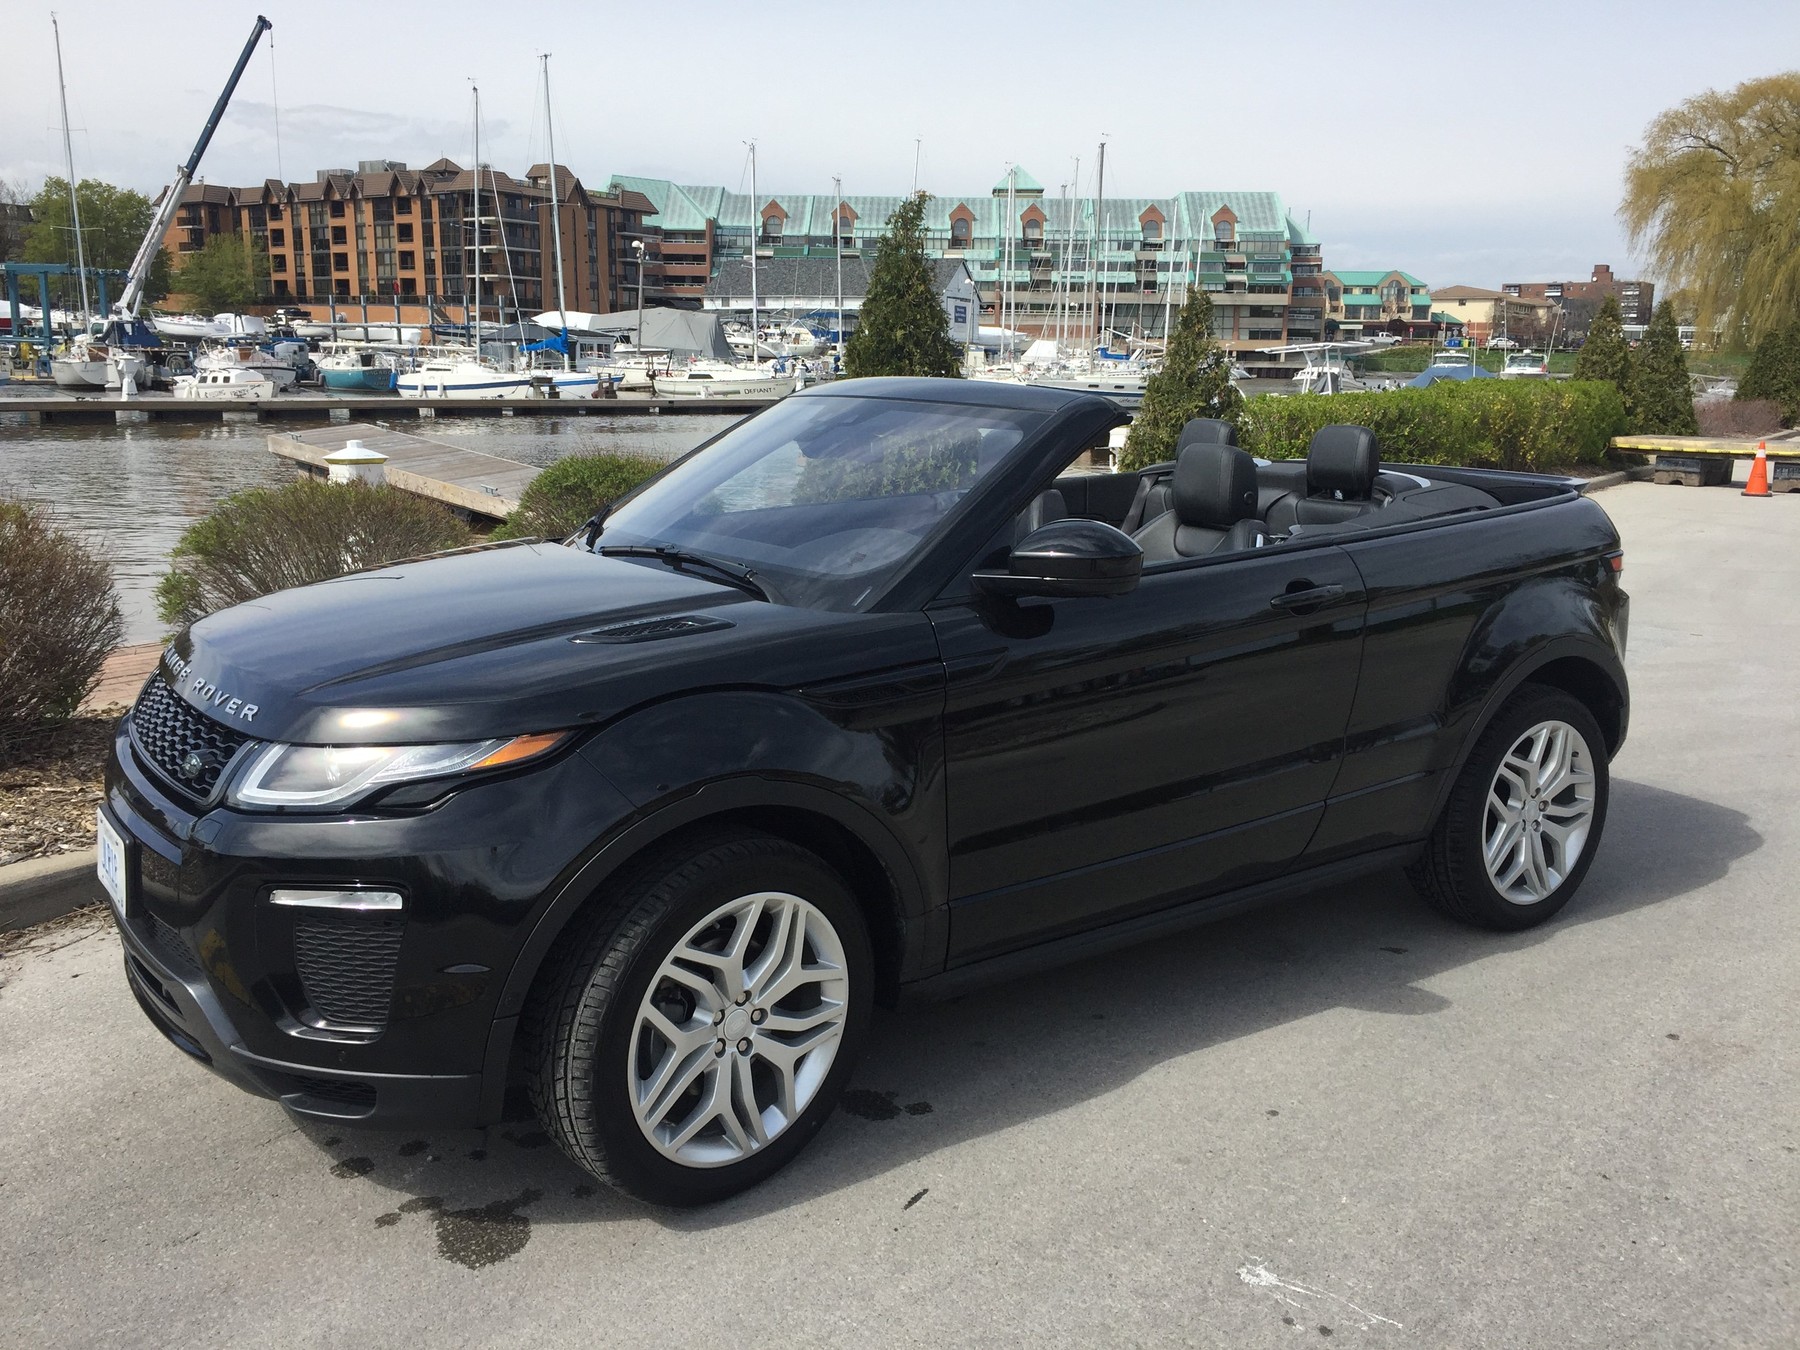 2017 Range Rover Evoque Convertible Exterior Front with Roof Down